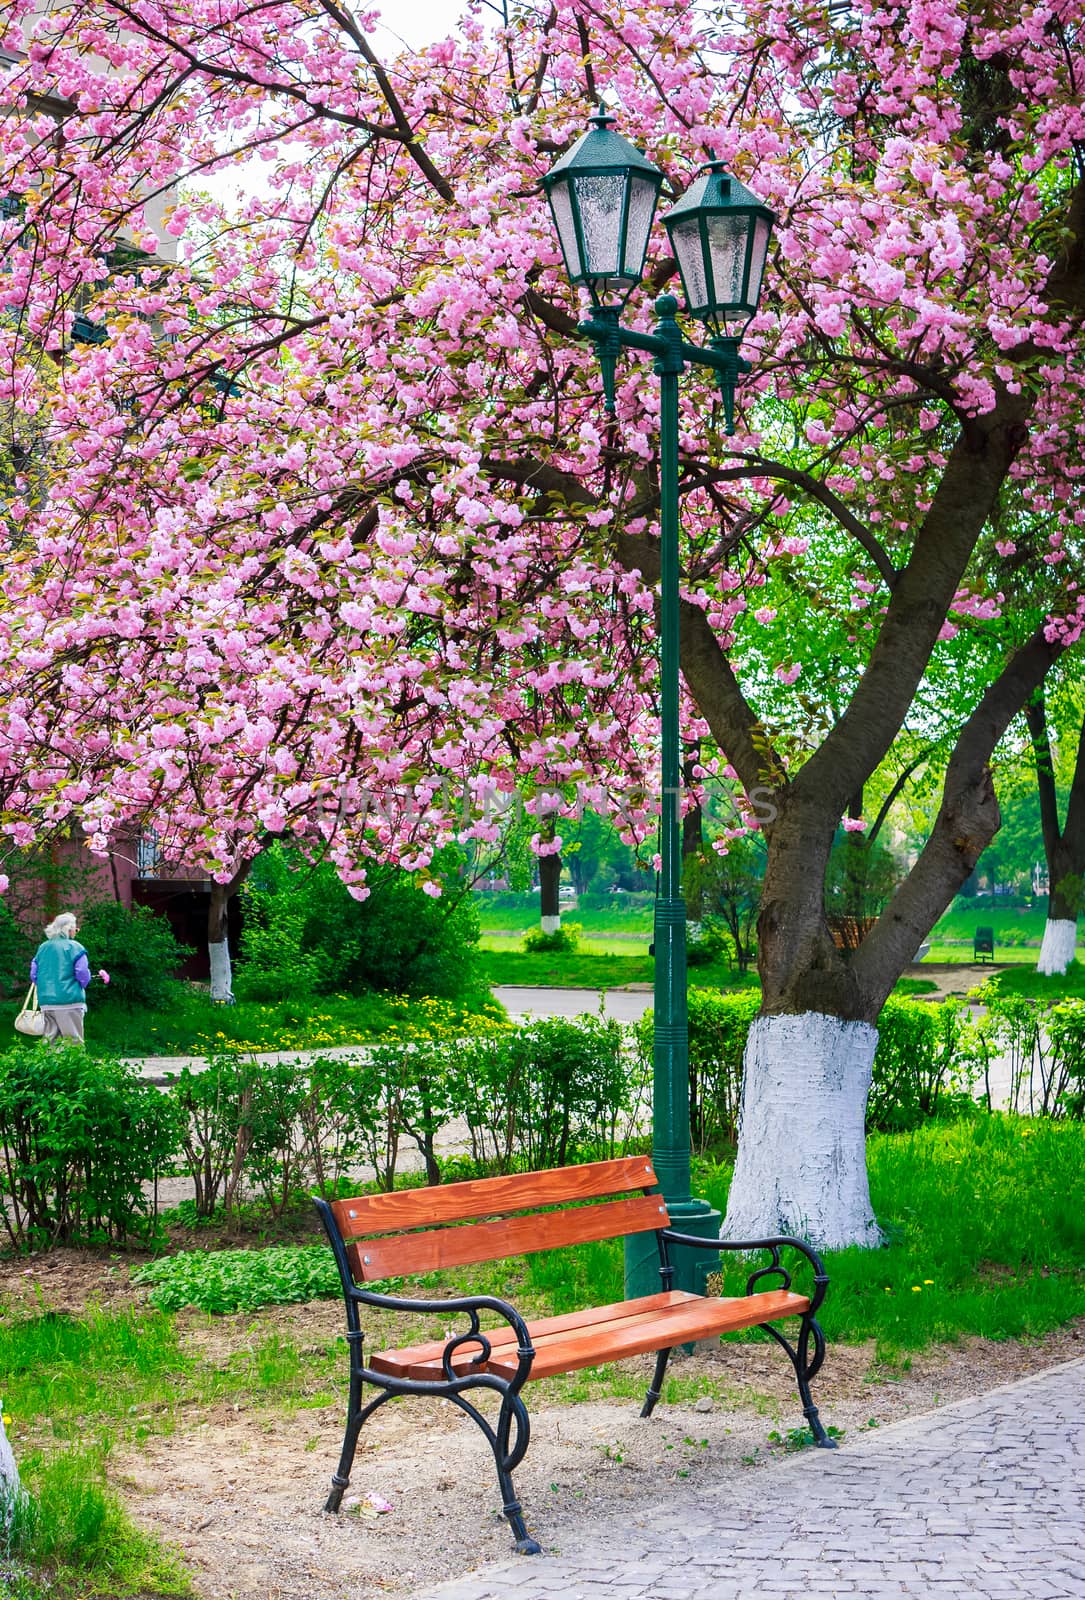 beautiful sakura blossom in the park. wooden bench and green lantern under the branches of tree